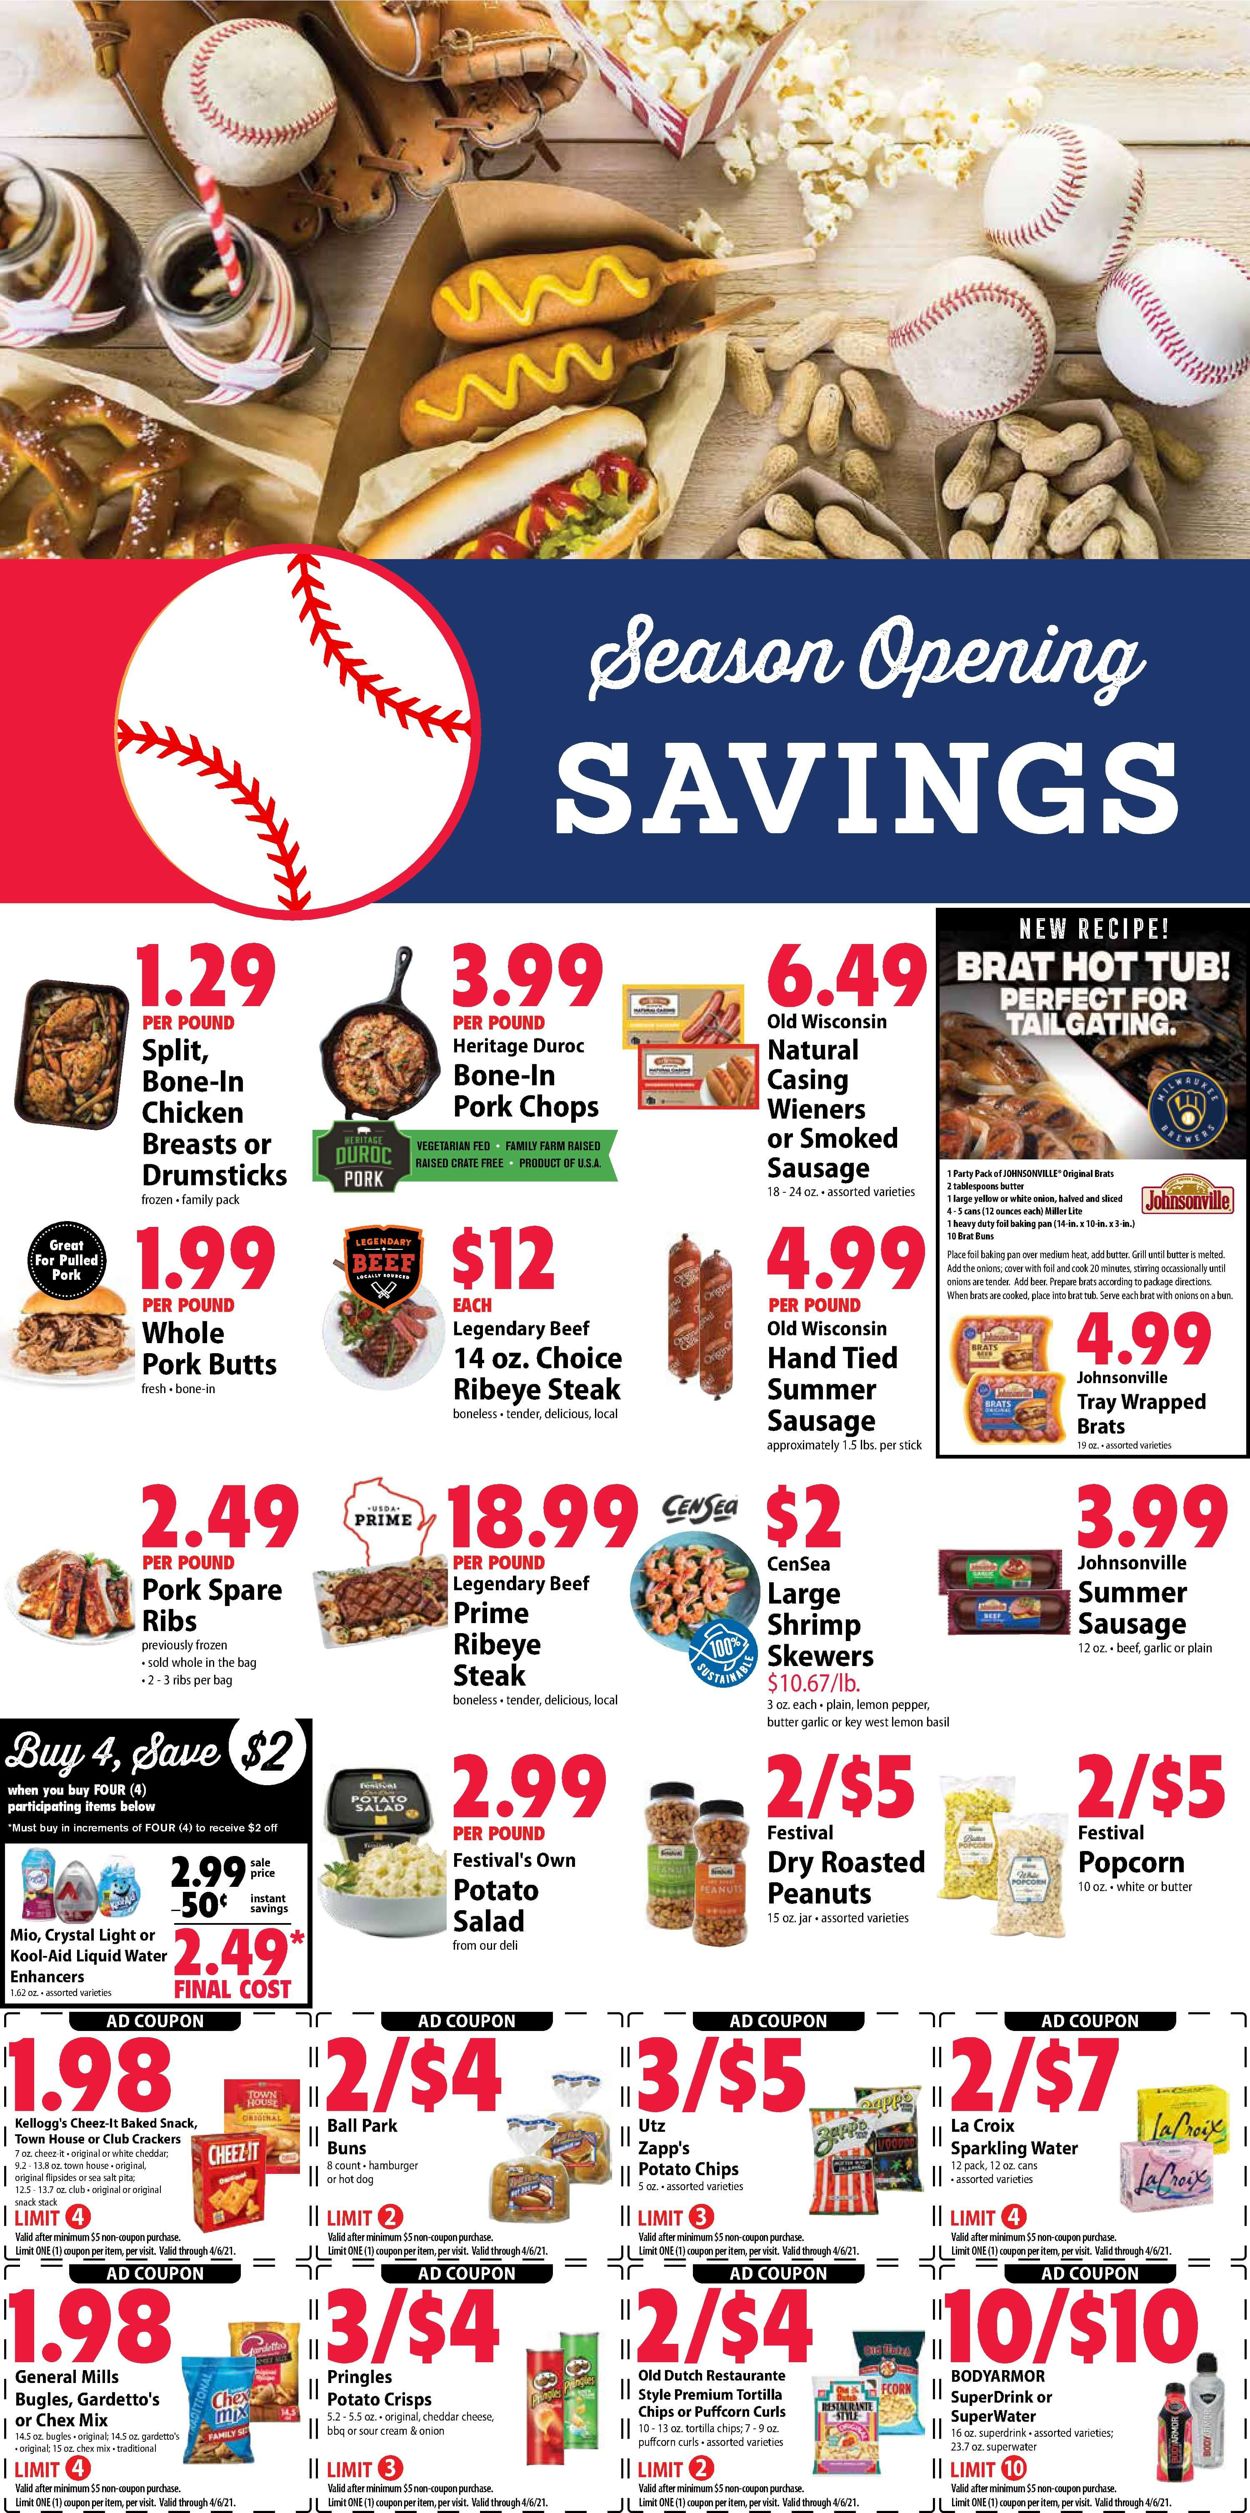 Festival Foods Easter 2021 ad Current weekly ad 03/31 04/06/2021 [4